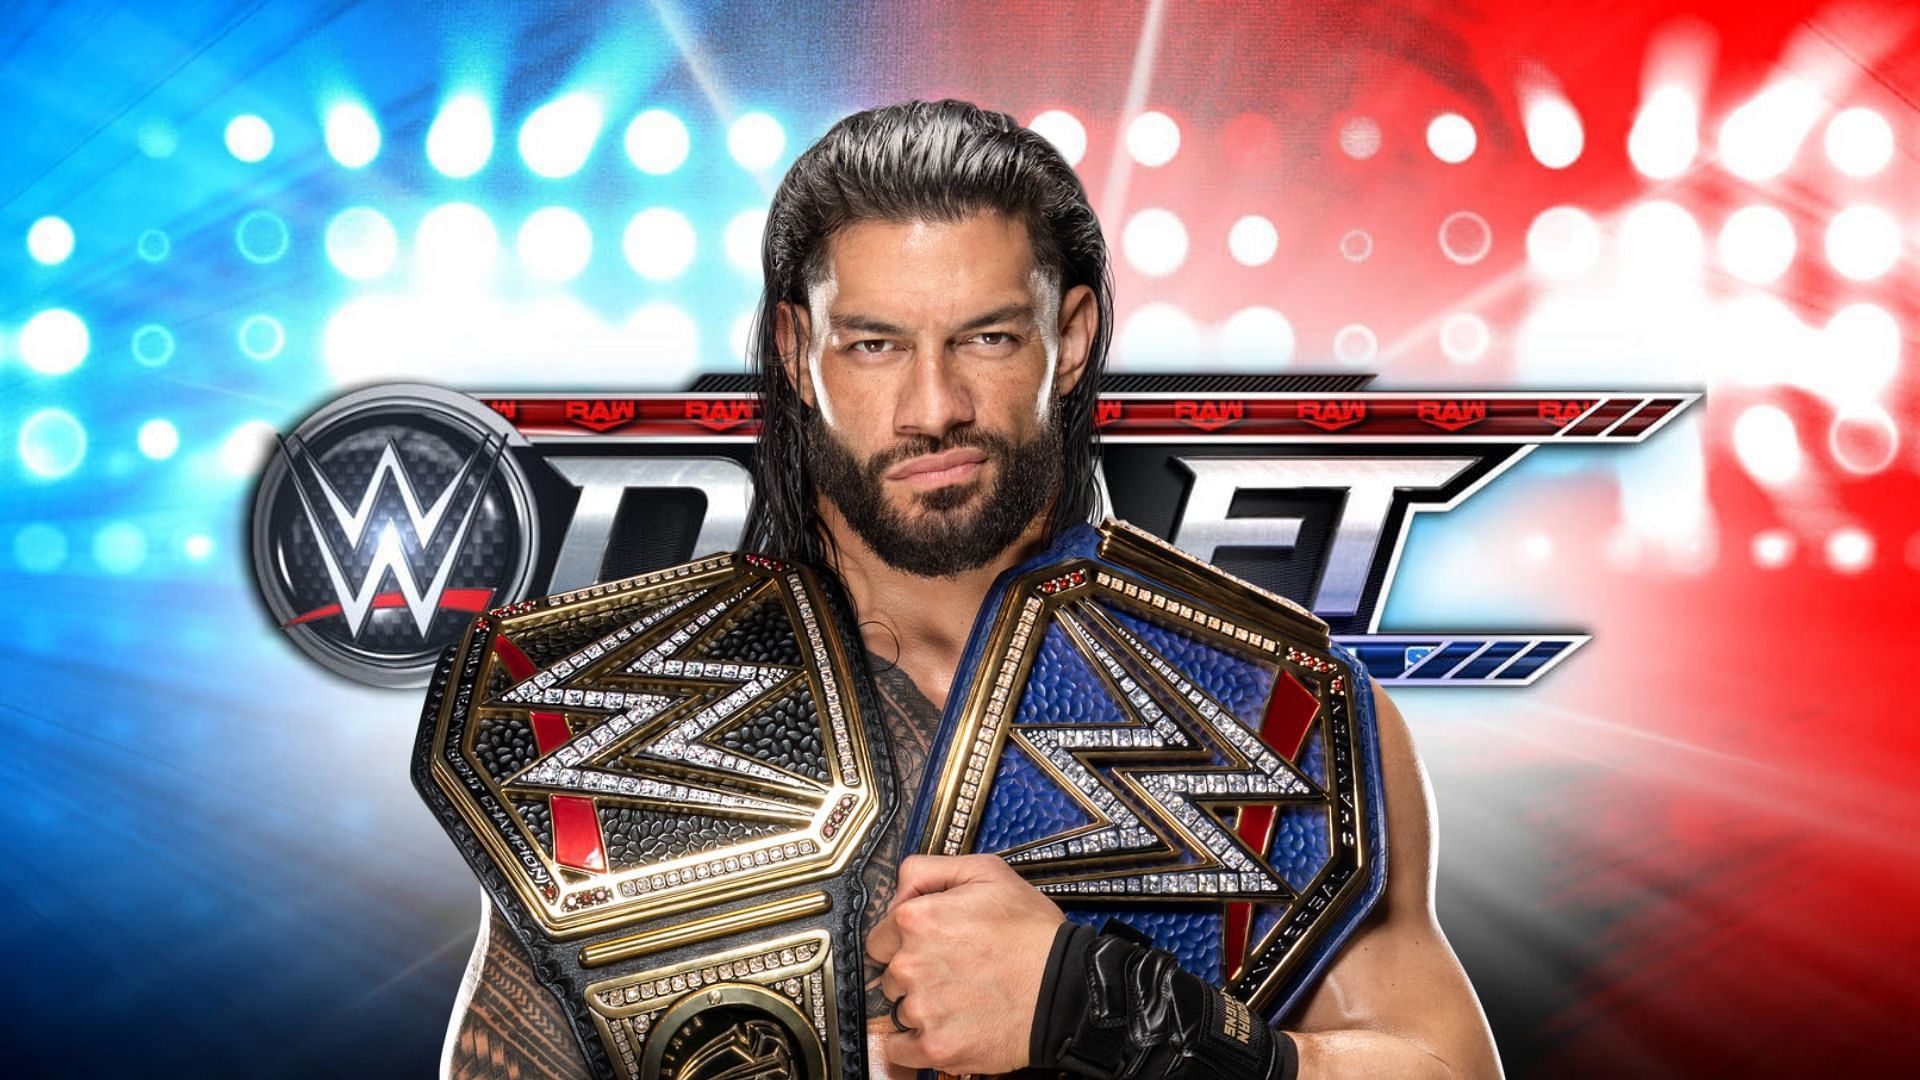 Roman Reigns is close to 1000 days as World Champion.